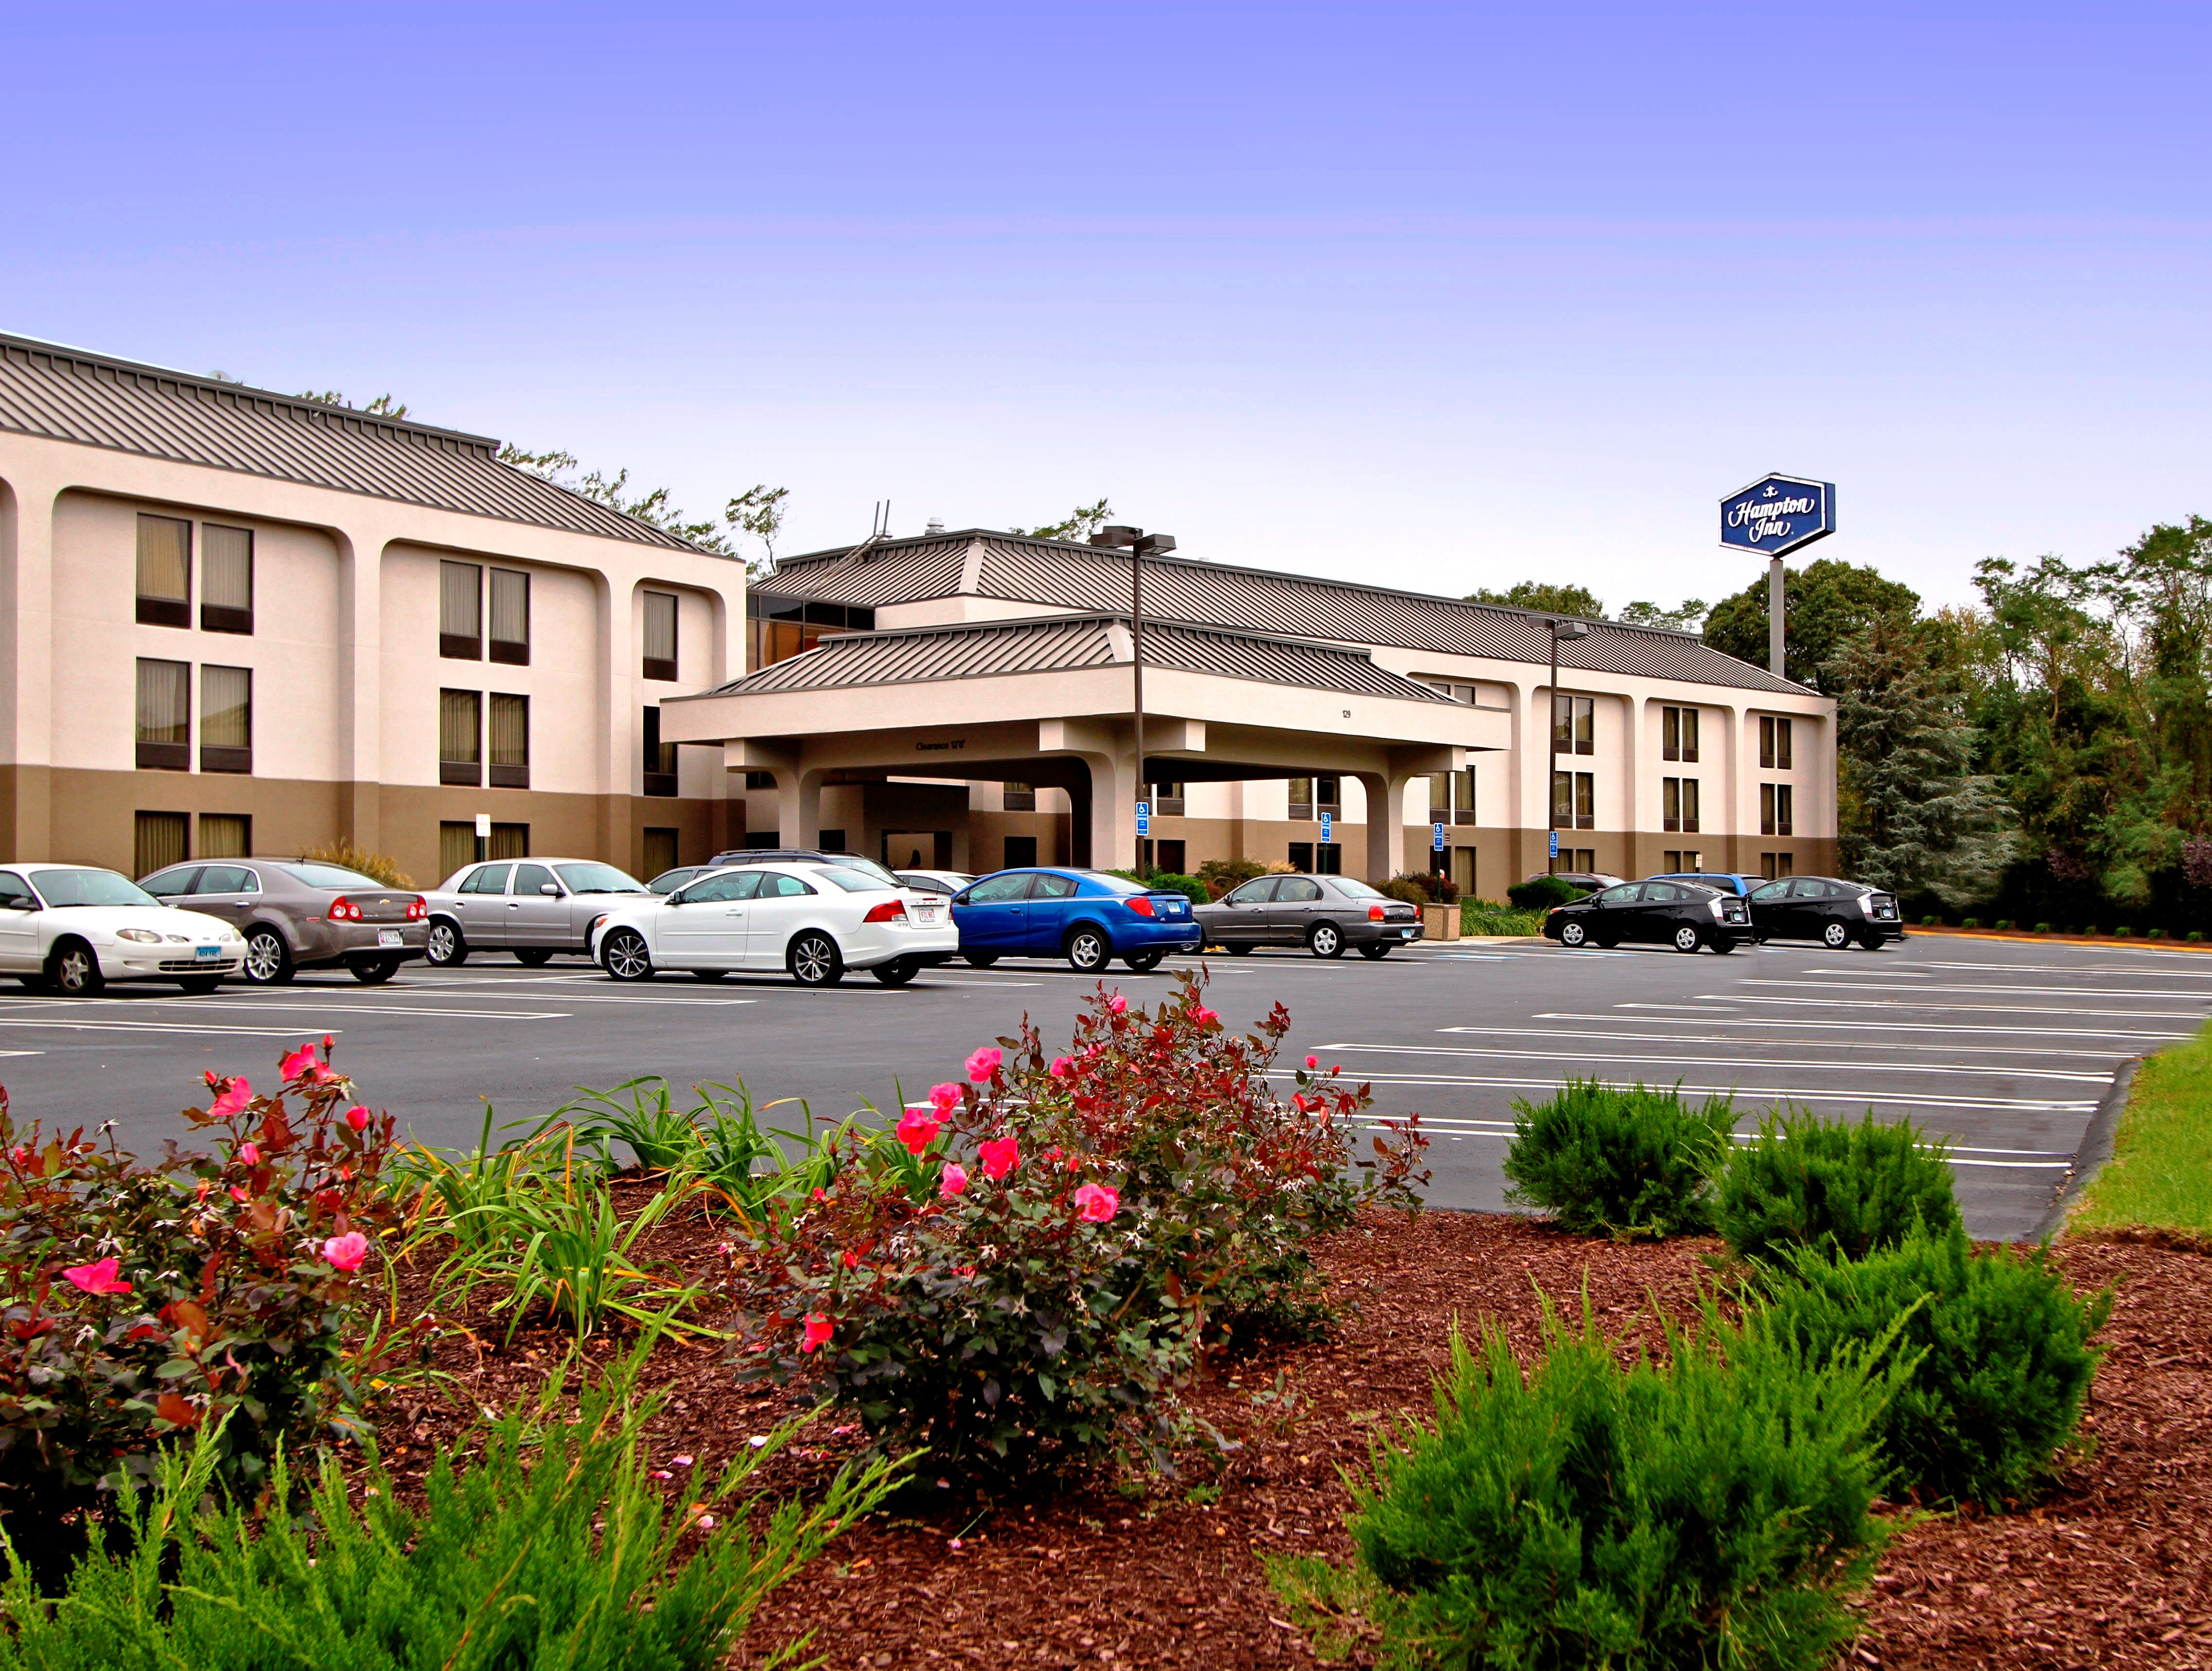 outside image of hotel with cars